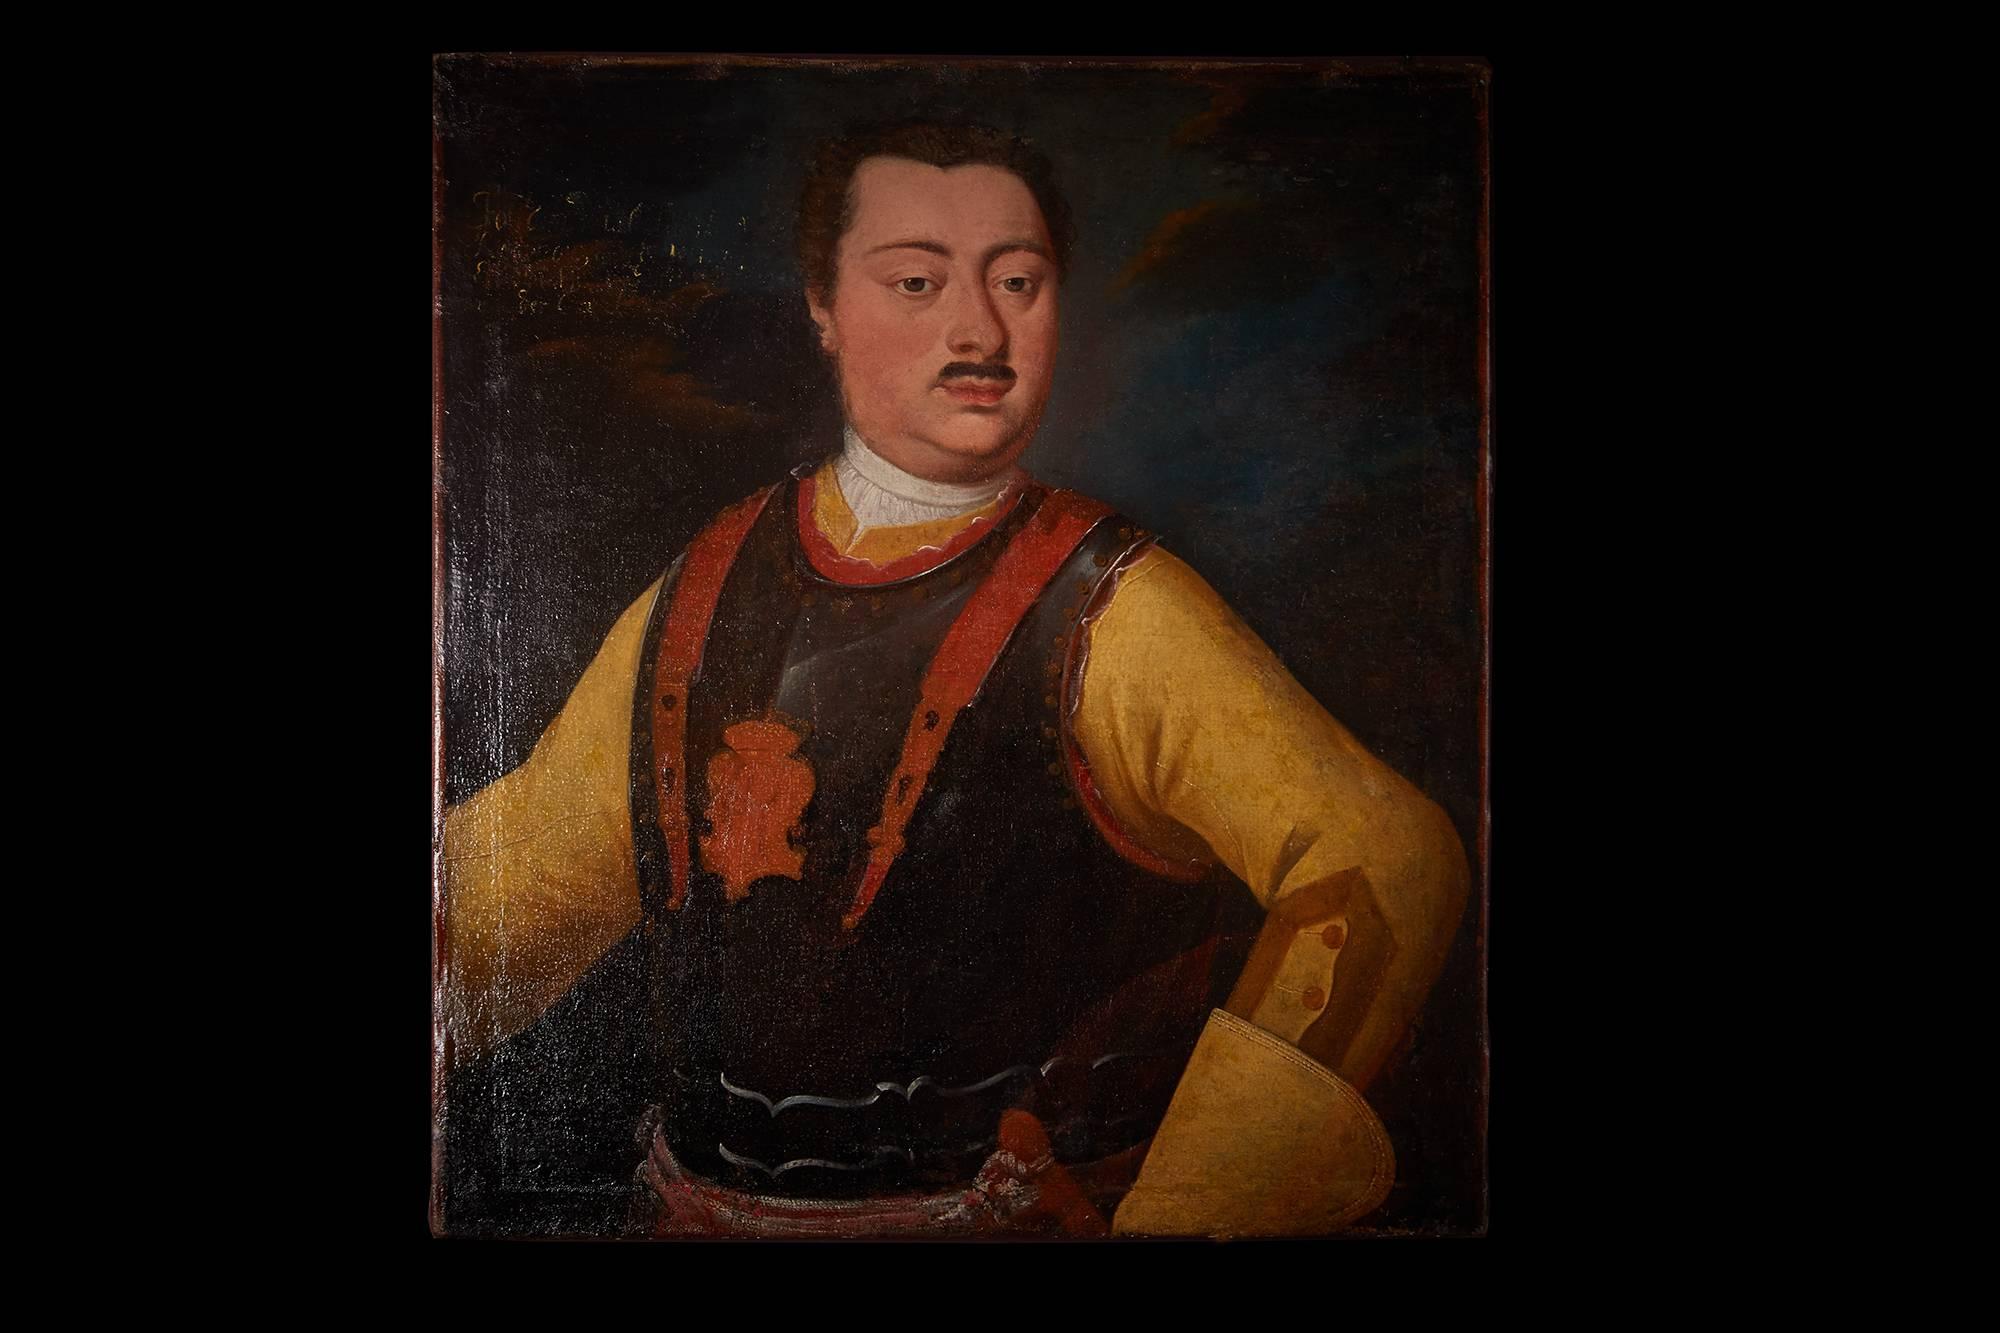 A wonderfully charismatic depiction, with rich and lustrous ochre tones and in excellent restored condition. This portrait is of the 18th century German School. It's provenance Palazzo Sacchetti, Rome. Unframed.